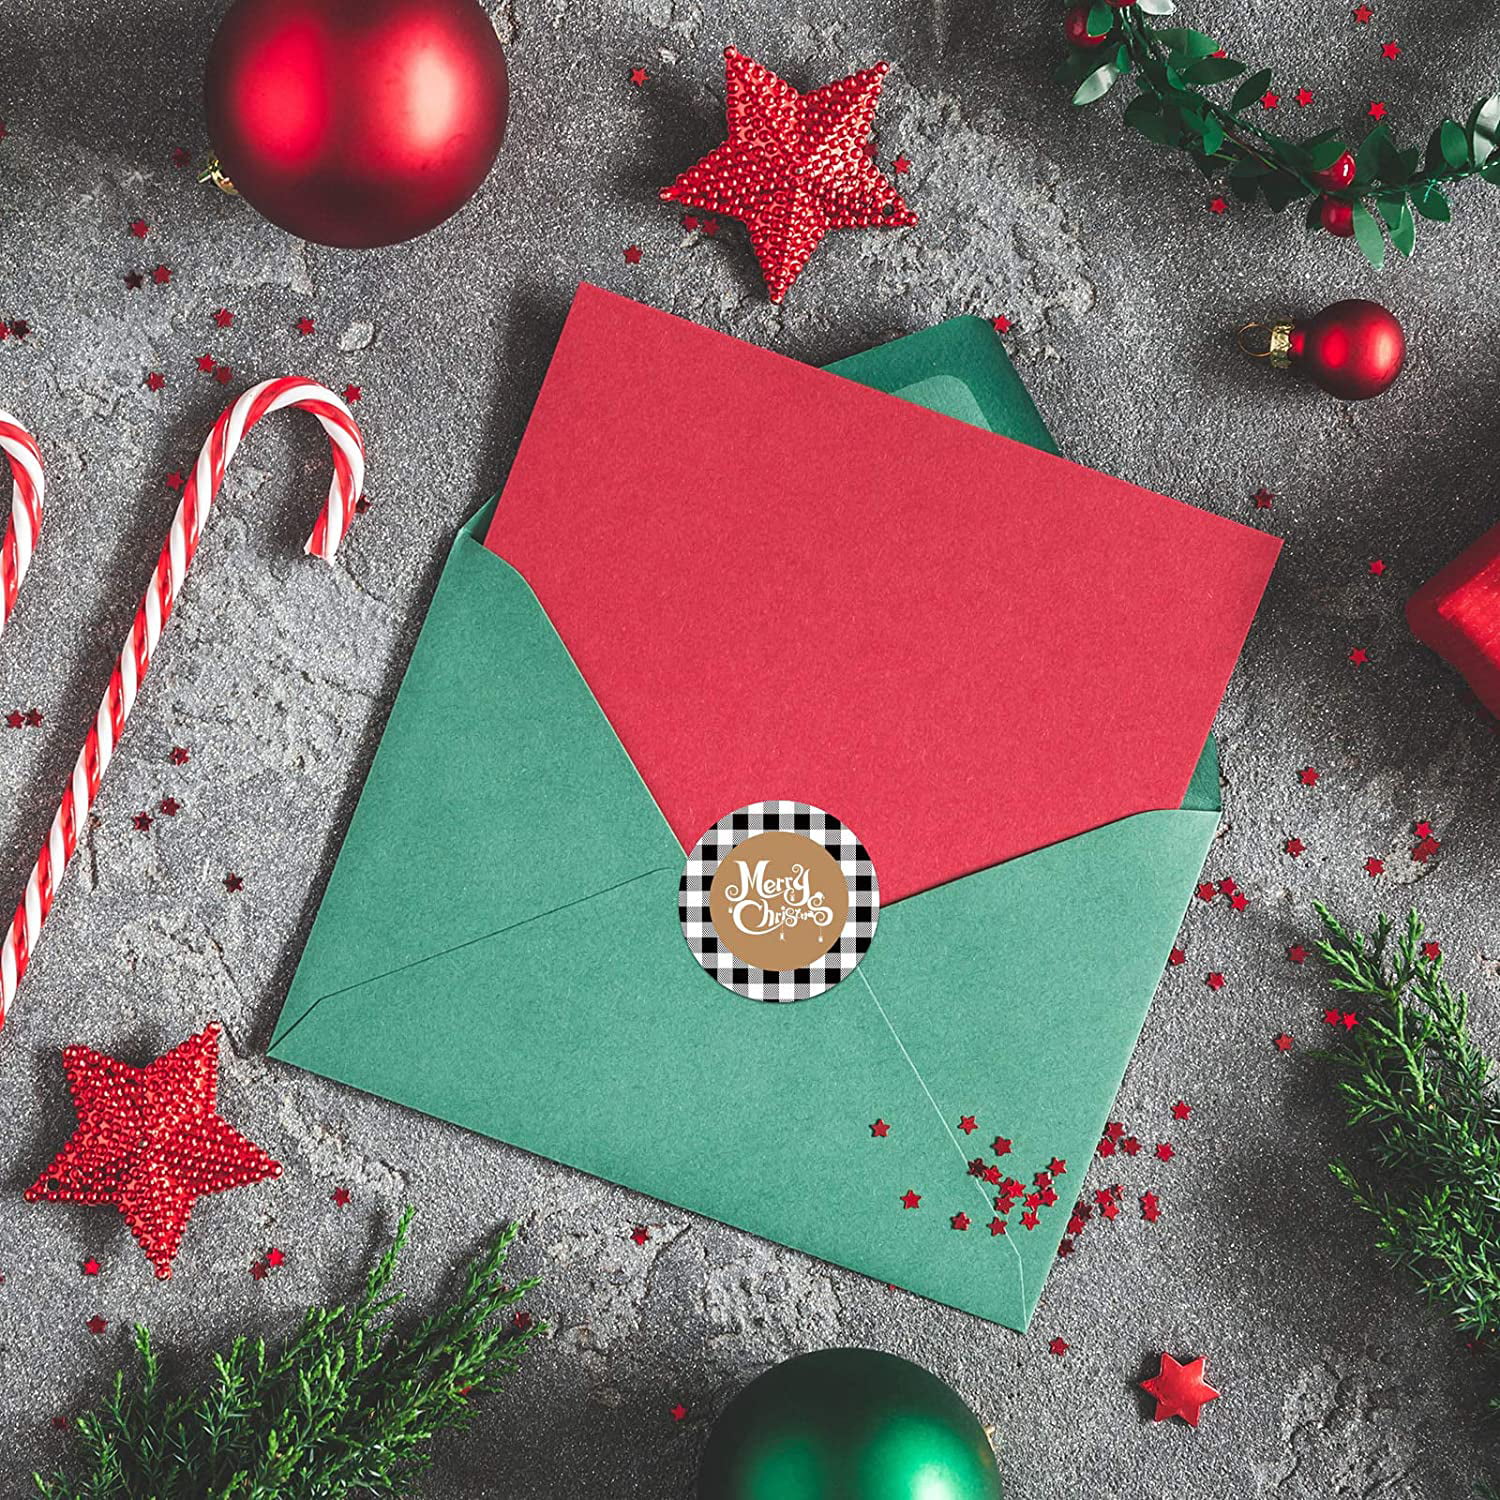 500* Merry Christmas Stickers Plaid Envelope Gifts Sealing Happy Holiday Labels 